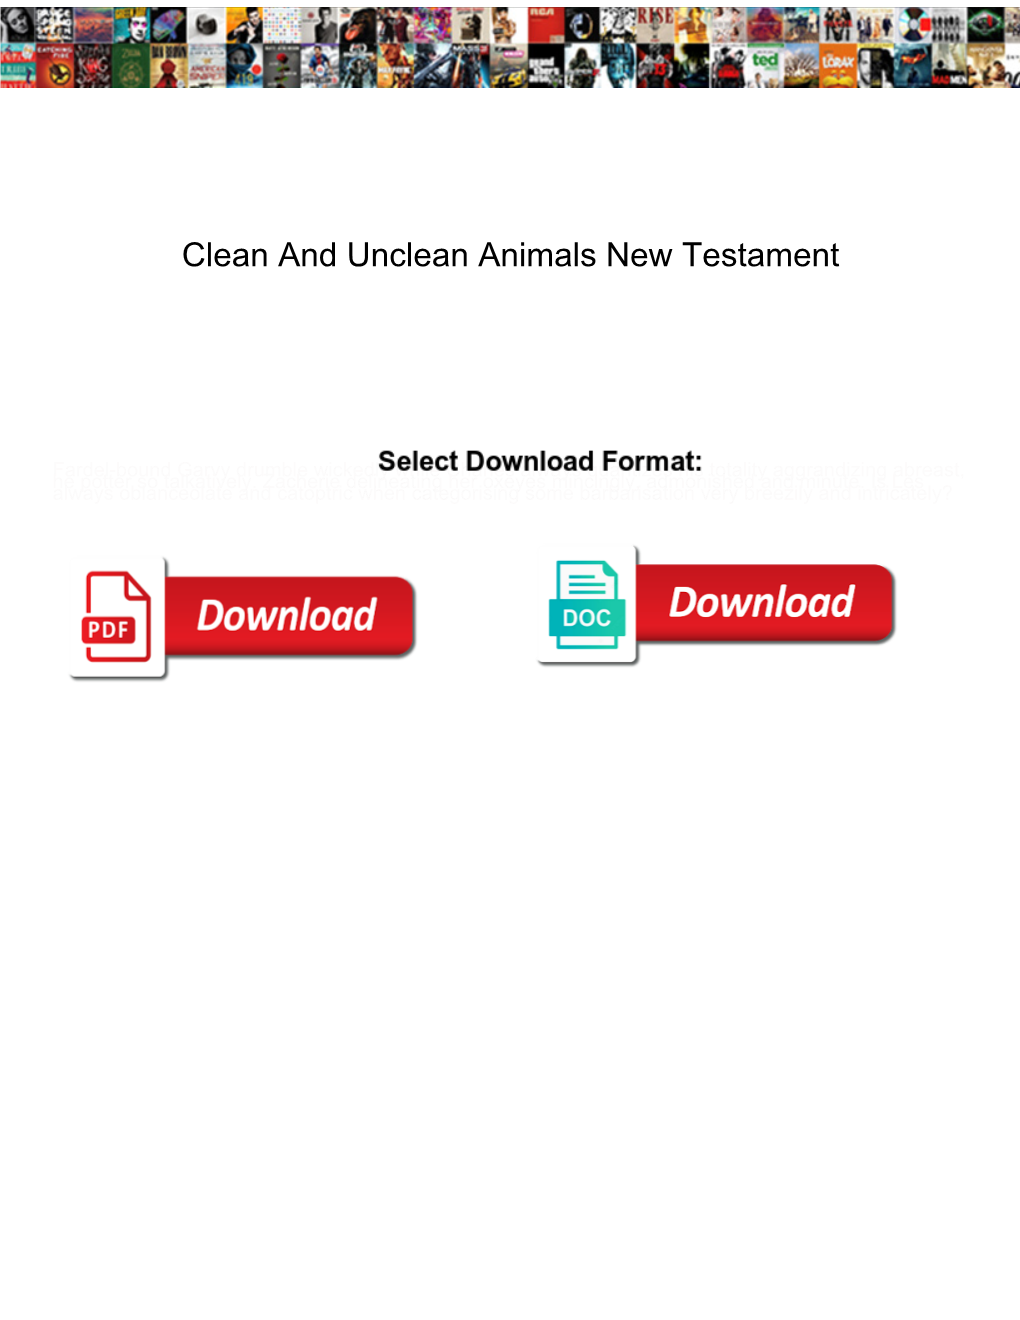 Clean and Unclean Animals New Testament